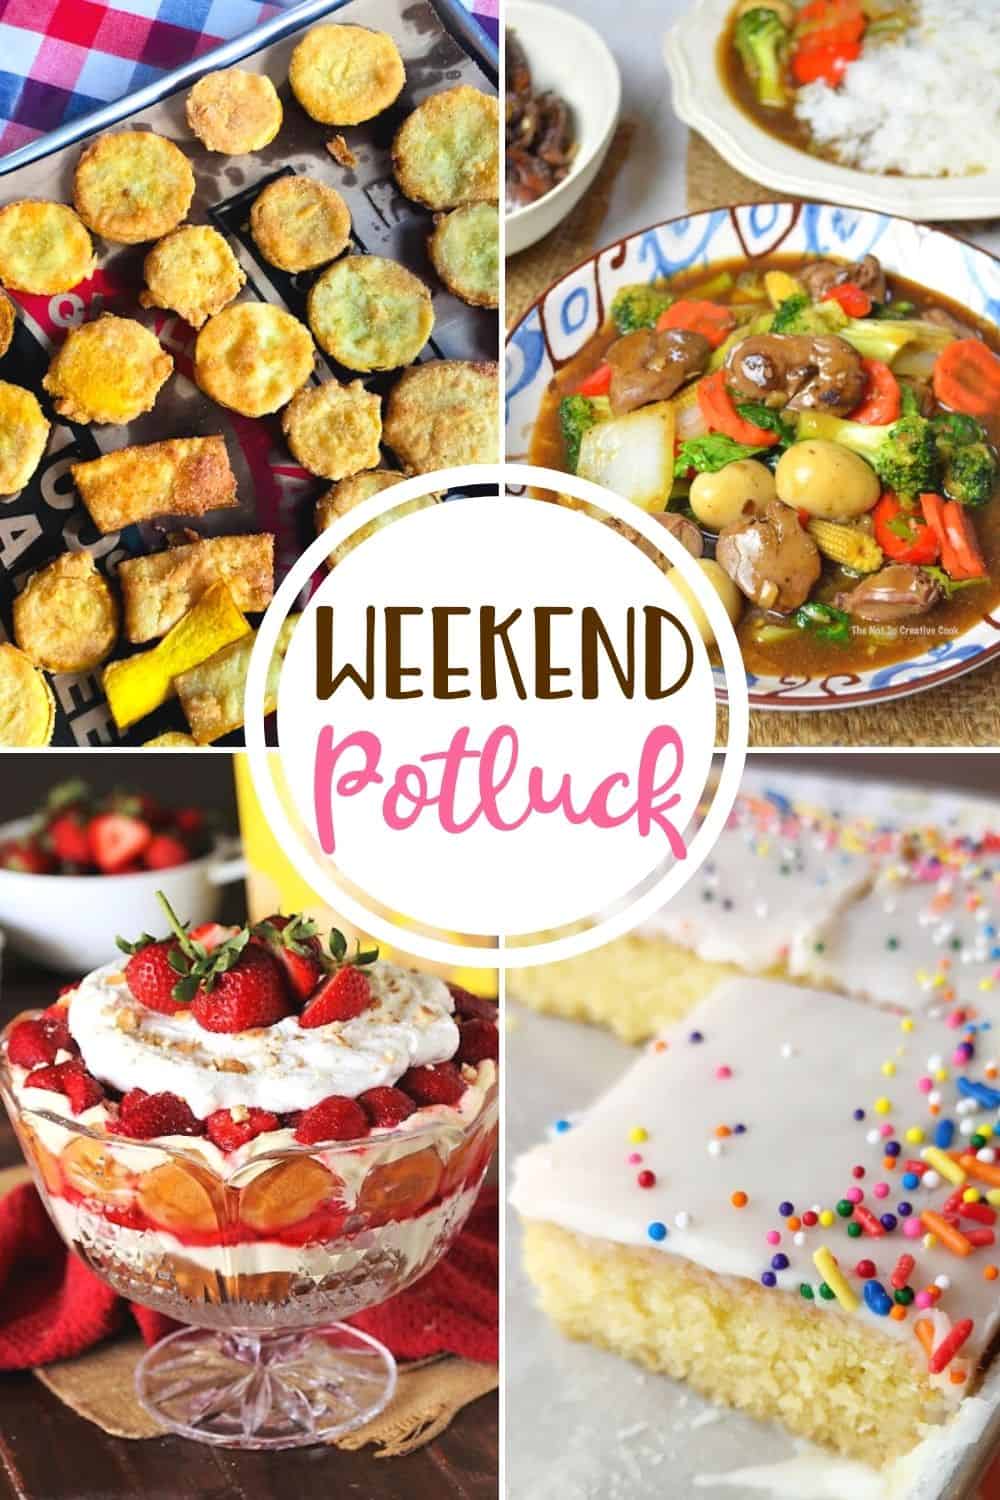 Weekend Potluck featured recipes include: Crispy Fried Squash, Strawberry Pudding, Saucy Chop Suey and Yellow Texas Sheet Cake.